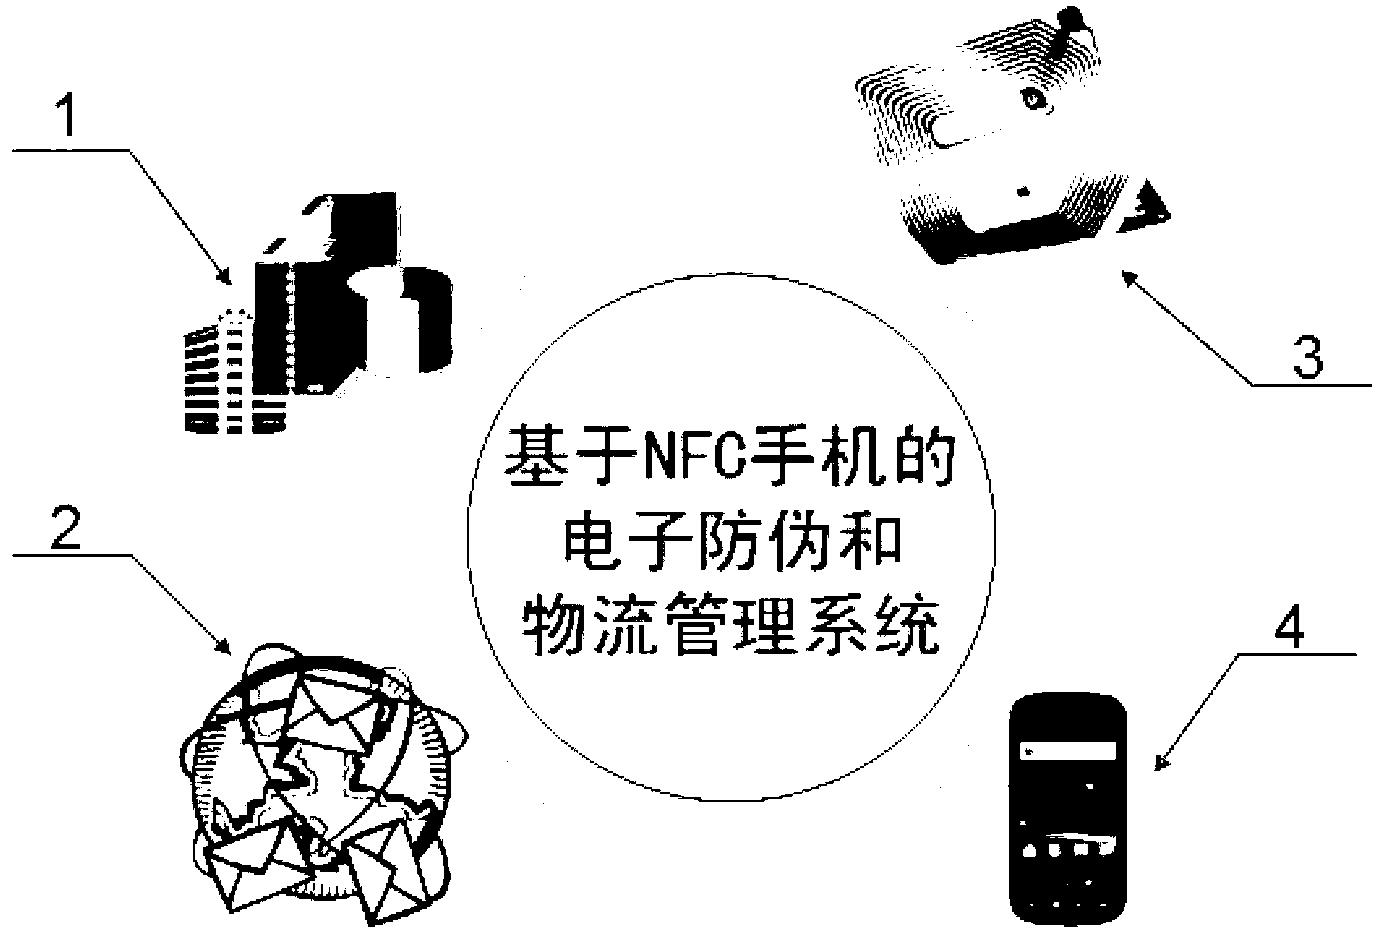 Electronic anti-counterfeiting and logistics management system based on NFC (near field communication) mobile phone